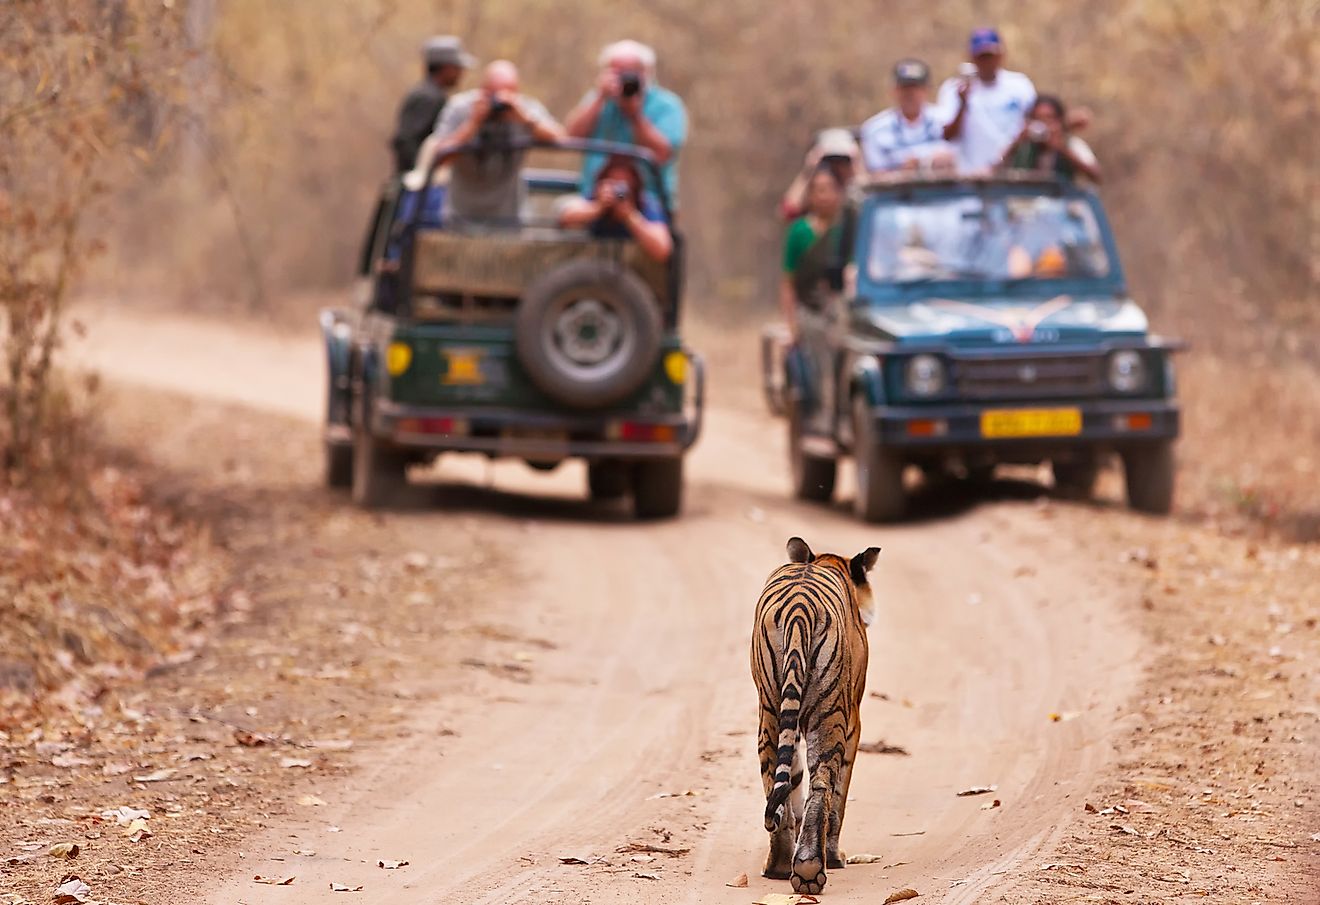 Safari vehicles with tourists observing tigers in the wild. Image credit: Travel Stock/Shutterstock.com